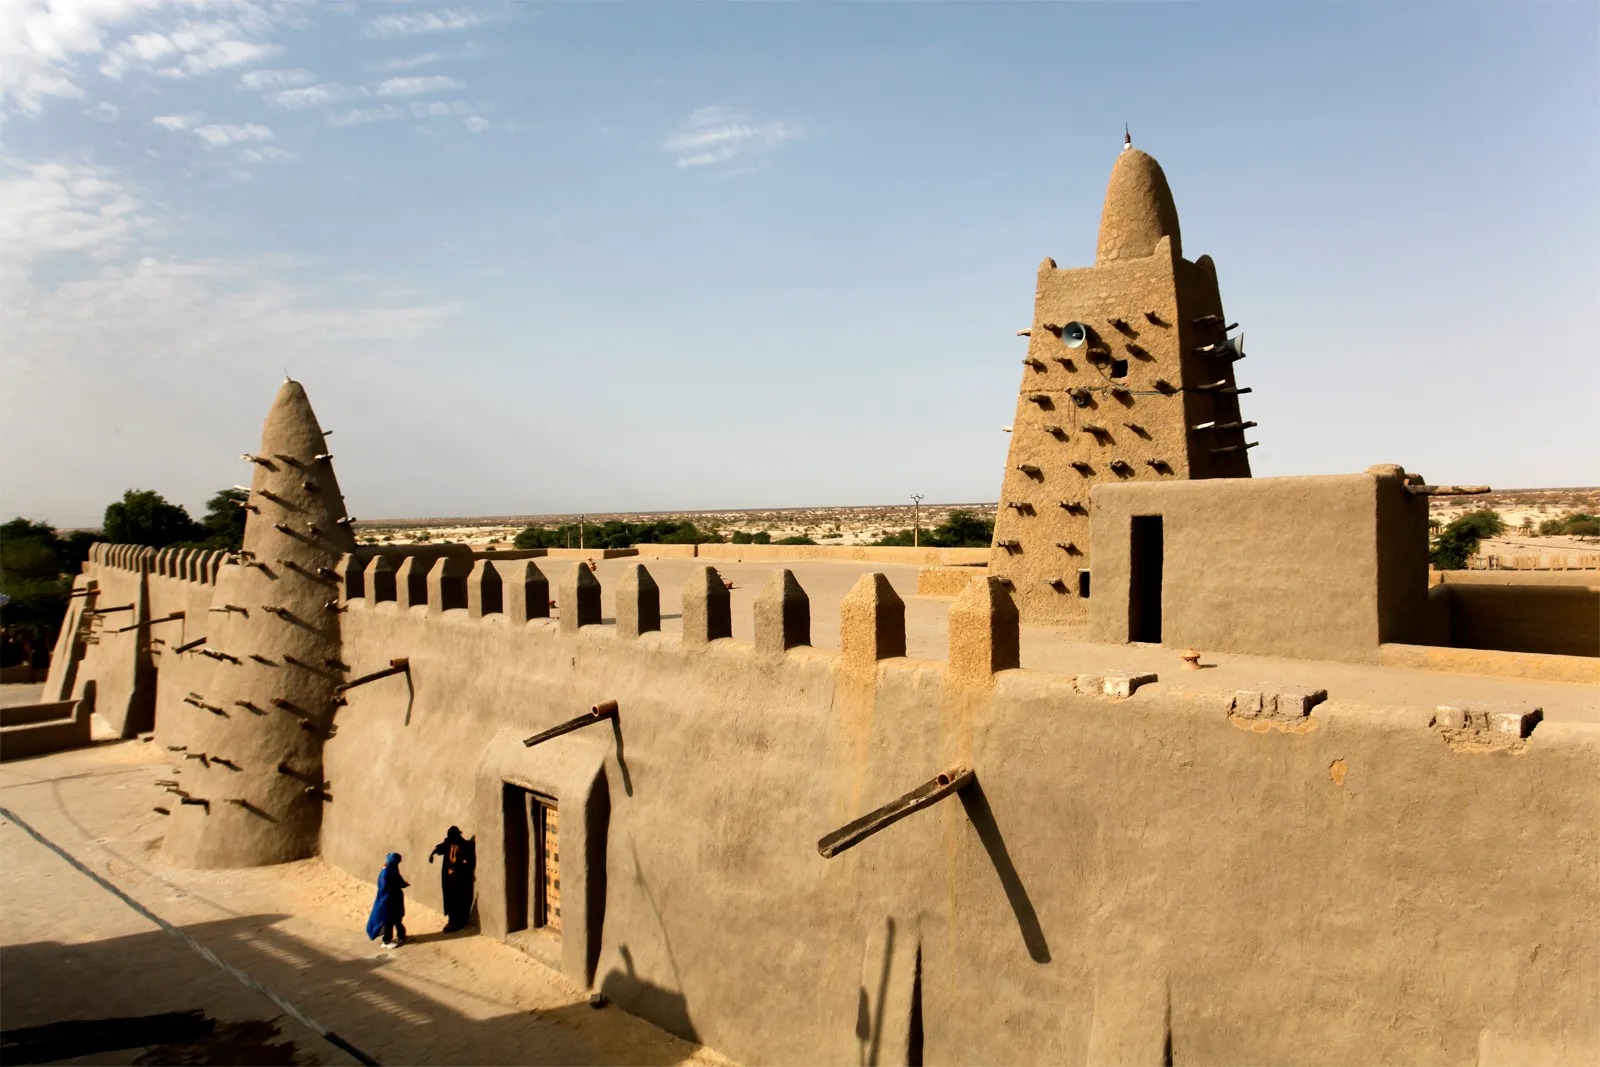 Only Actual Geography Geniuses Can Score 16 on This Quiz Timbuktu, Mali